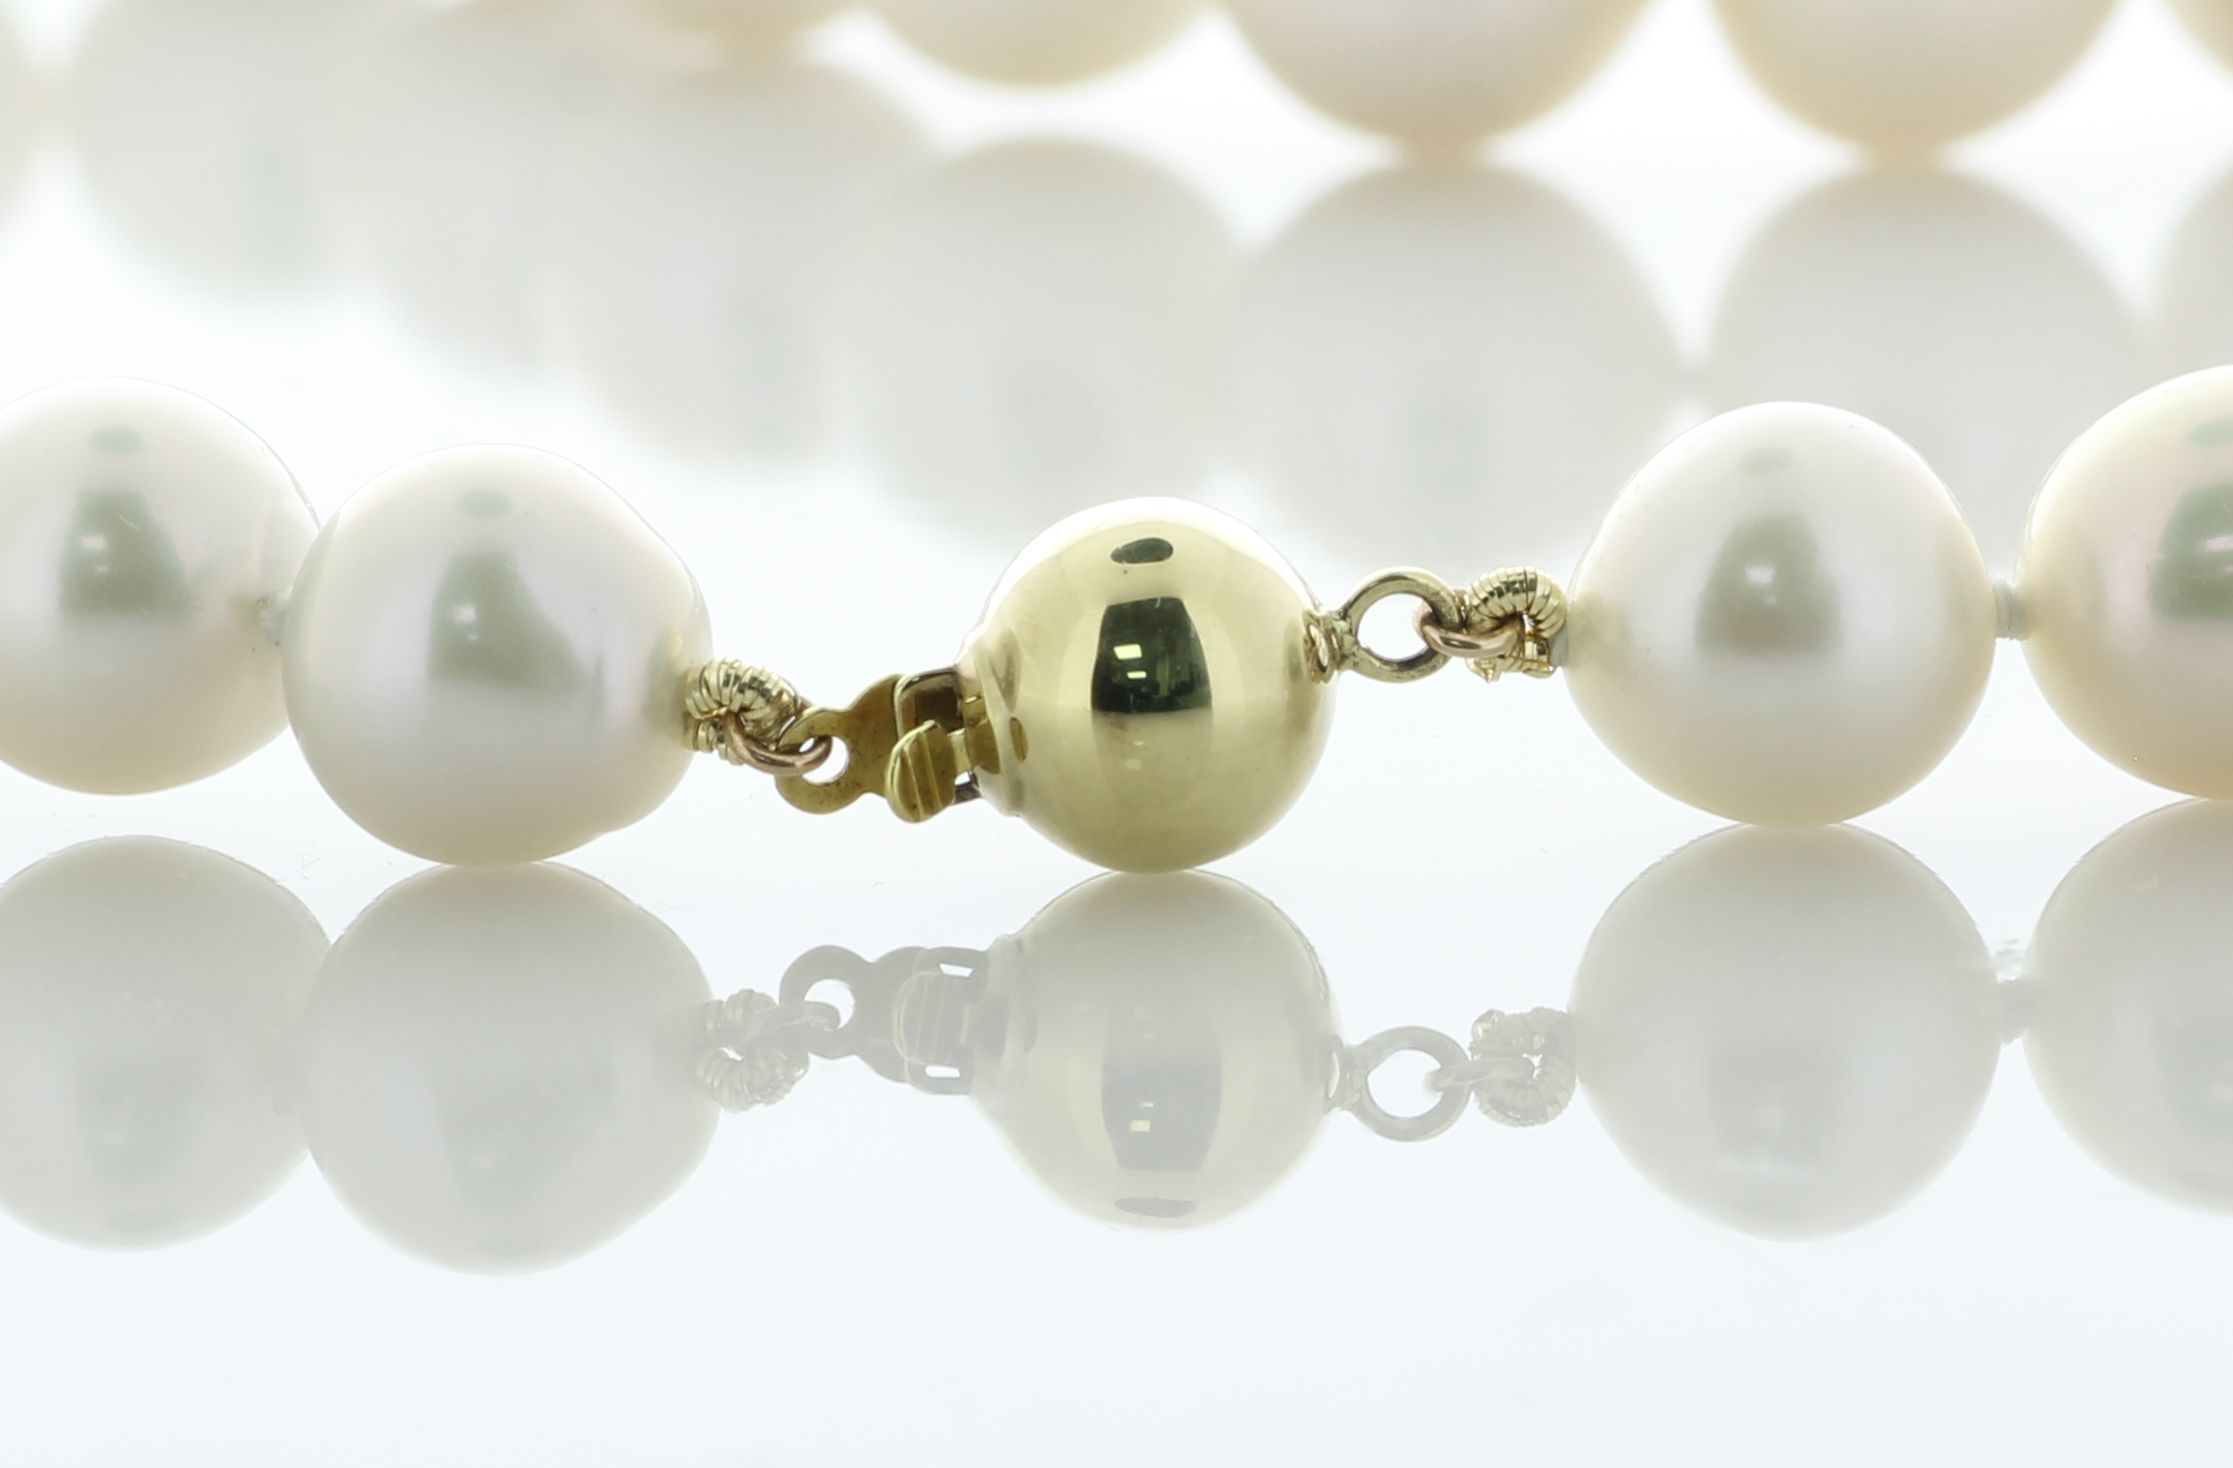 18 inch White Round 10.0 - 12.0mm Ming Pearl Necklace With 9ct Yellow Gold Clasp - Image 4 of 7